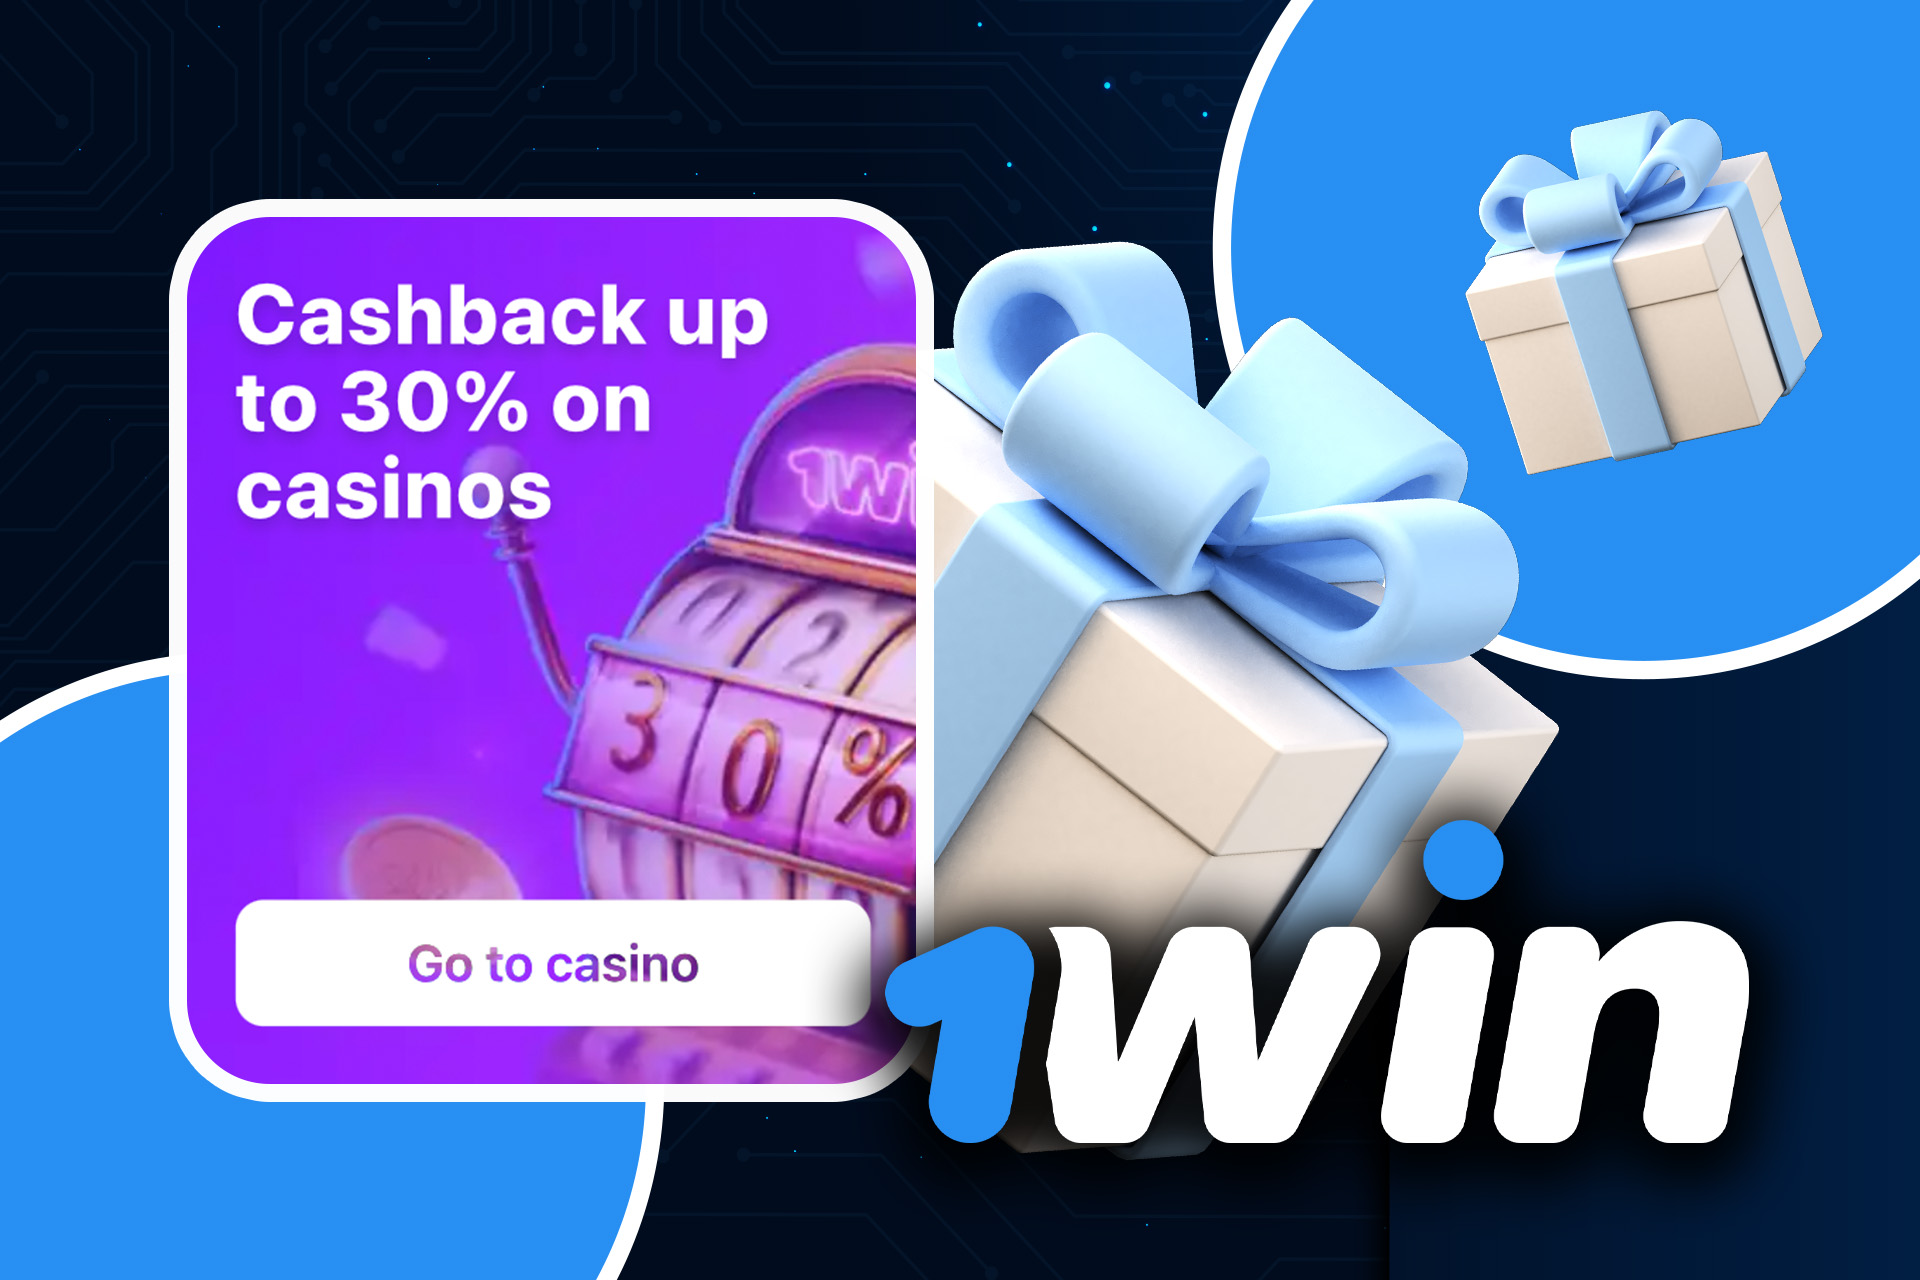 1Win cashback allows you to get back 30% of your lost money weekly.